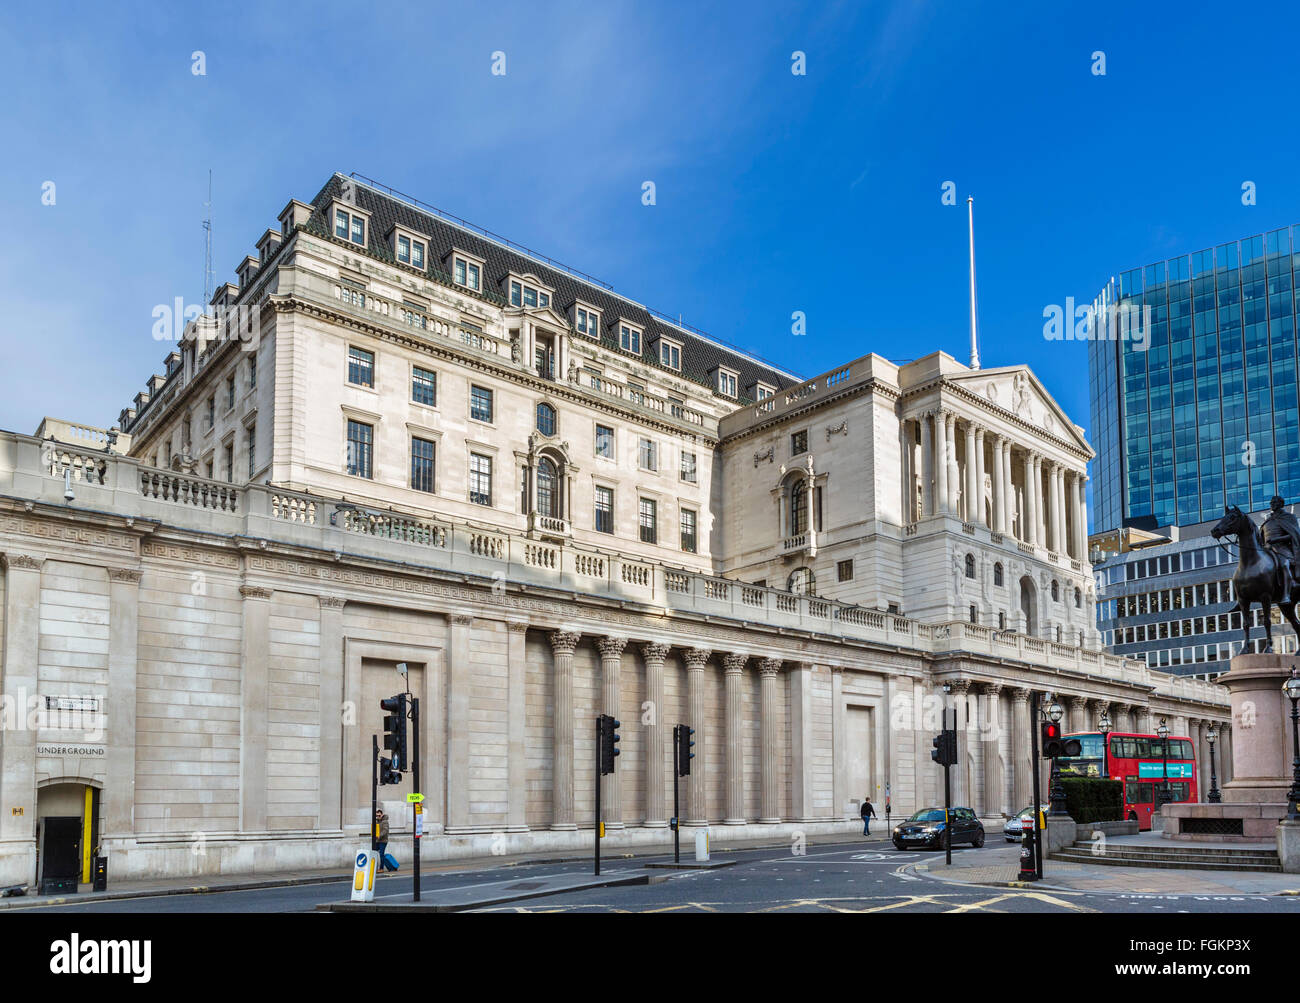 La Banque d'Angleterre, Threadneedle Street, City of London, Londres, Angleterre, RU Banque D'Images